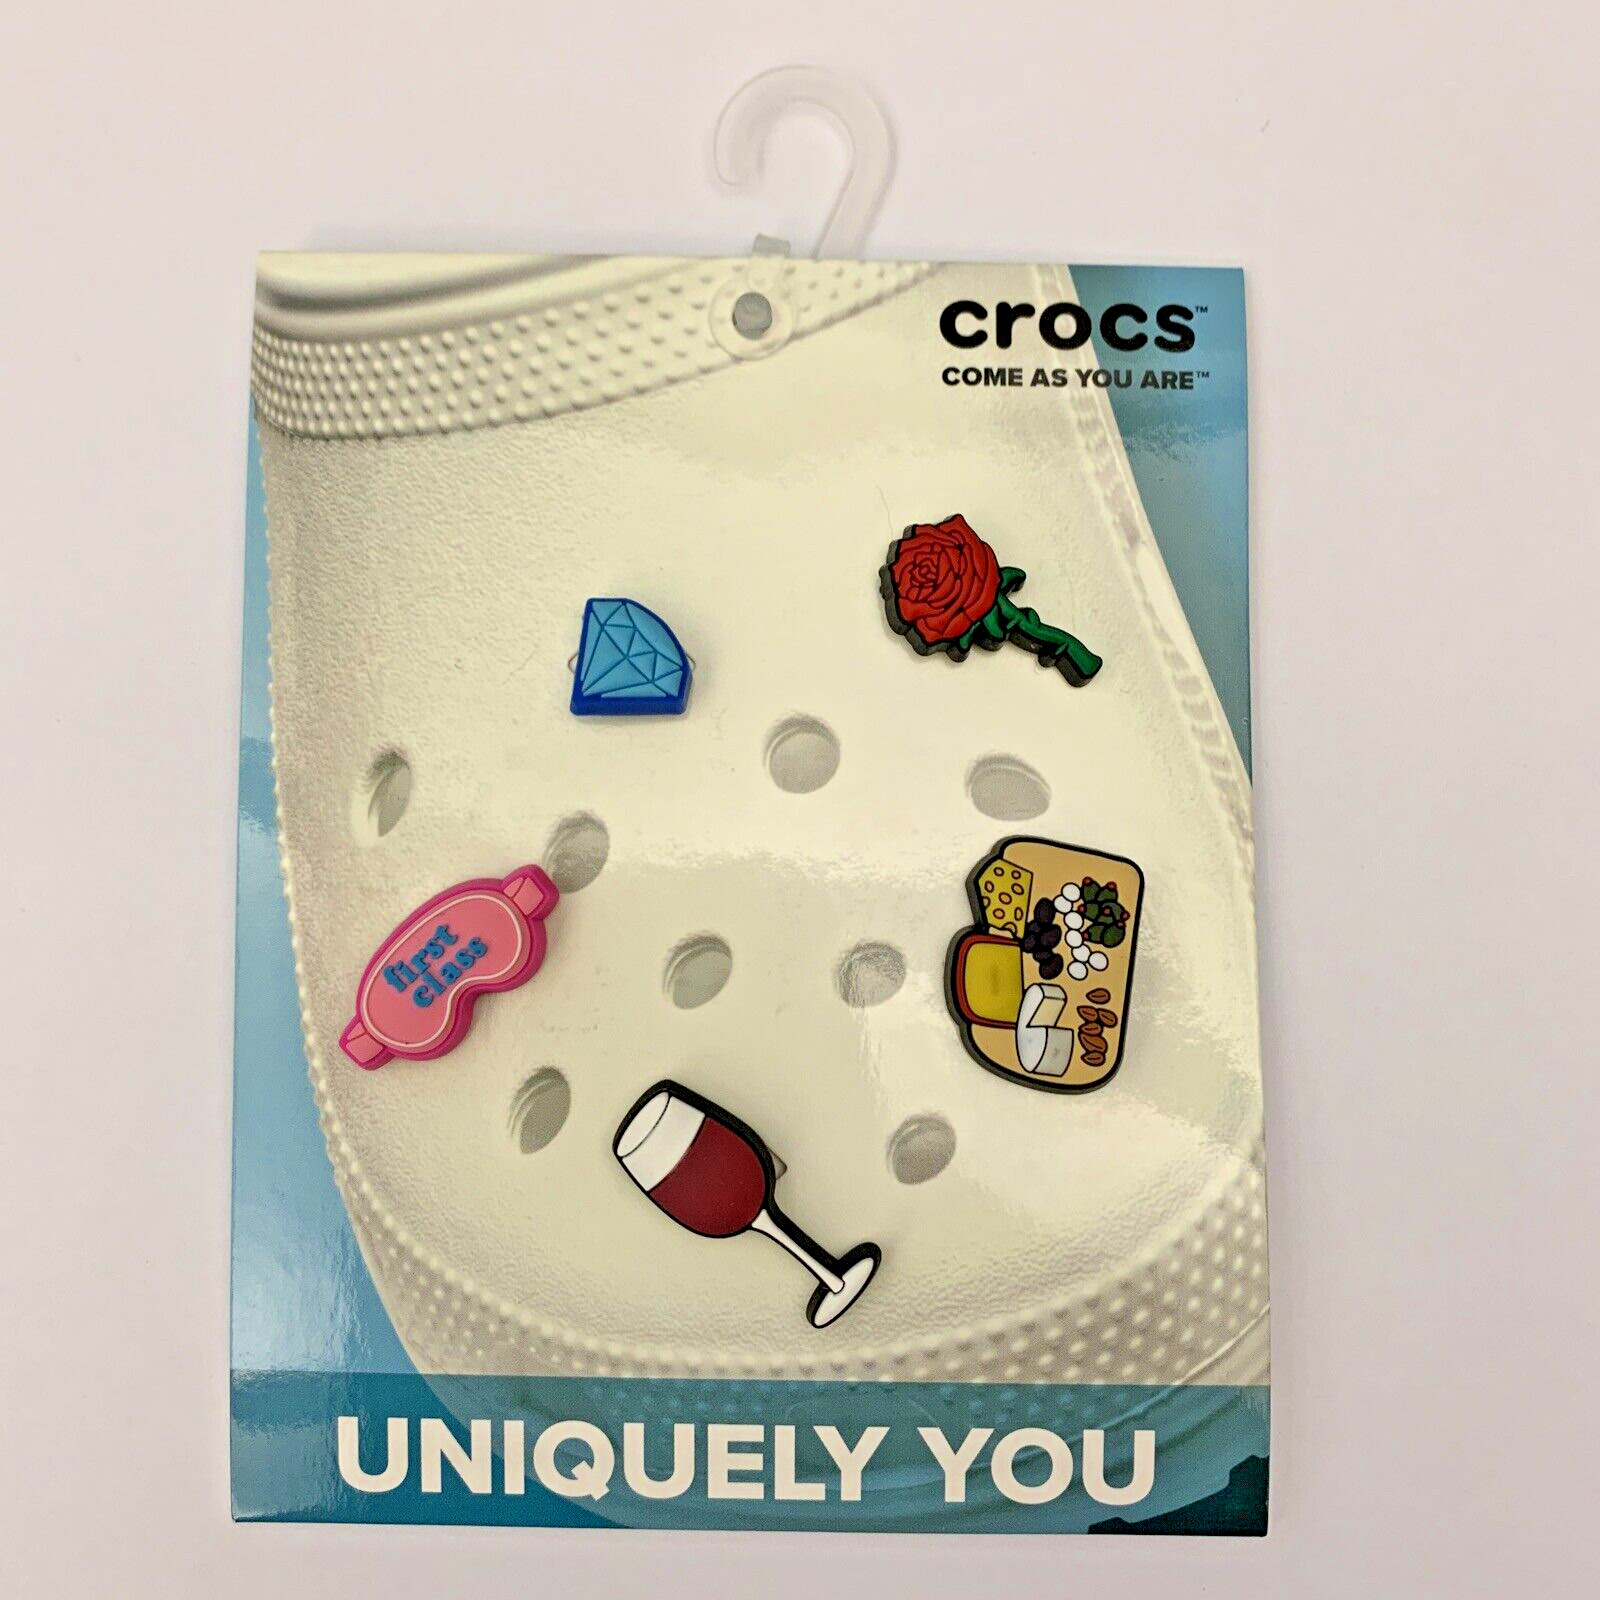 Crocs Charms Come As You Are Ladies Night Uniquely You New 5 Pack Clogs Shoes Ln